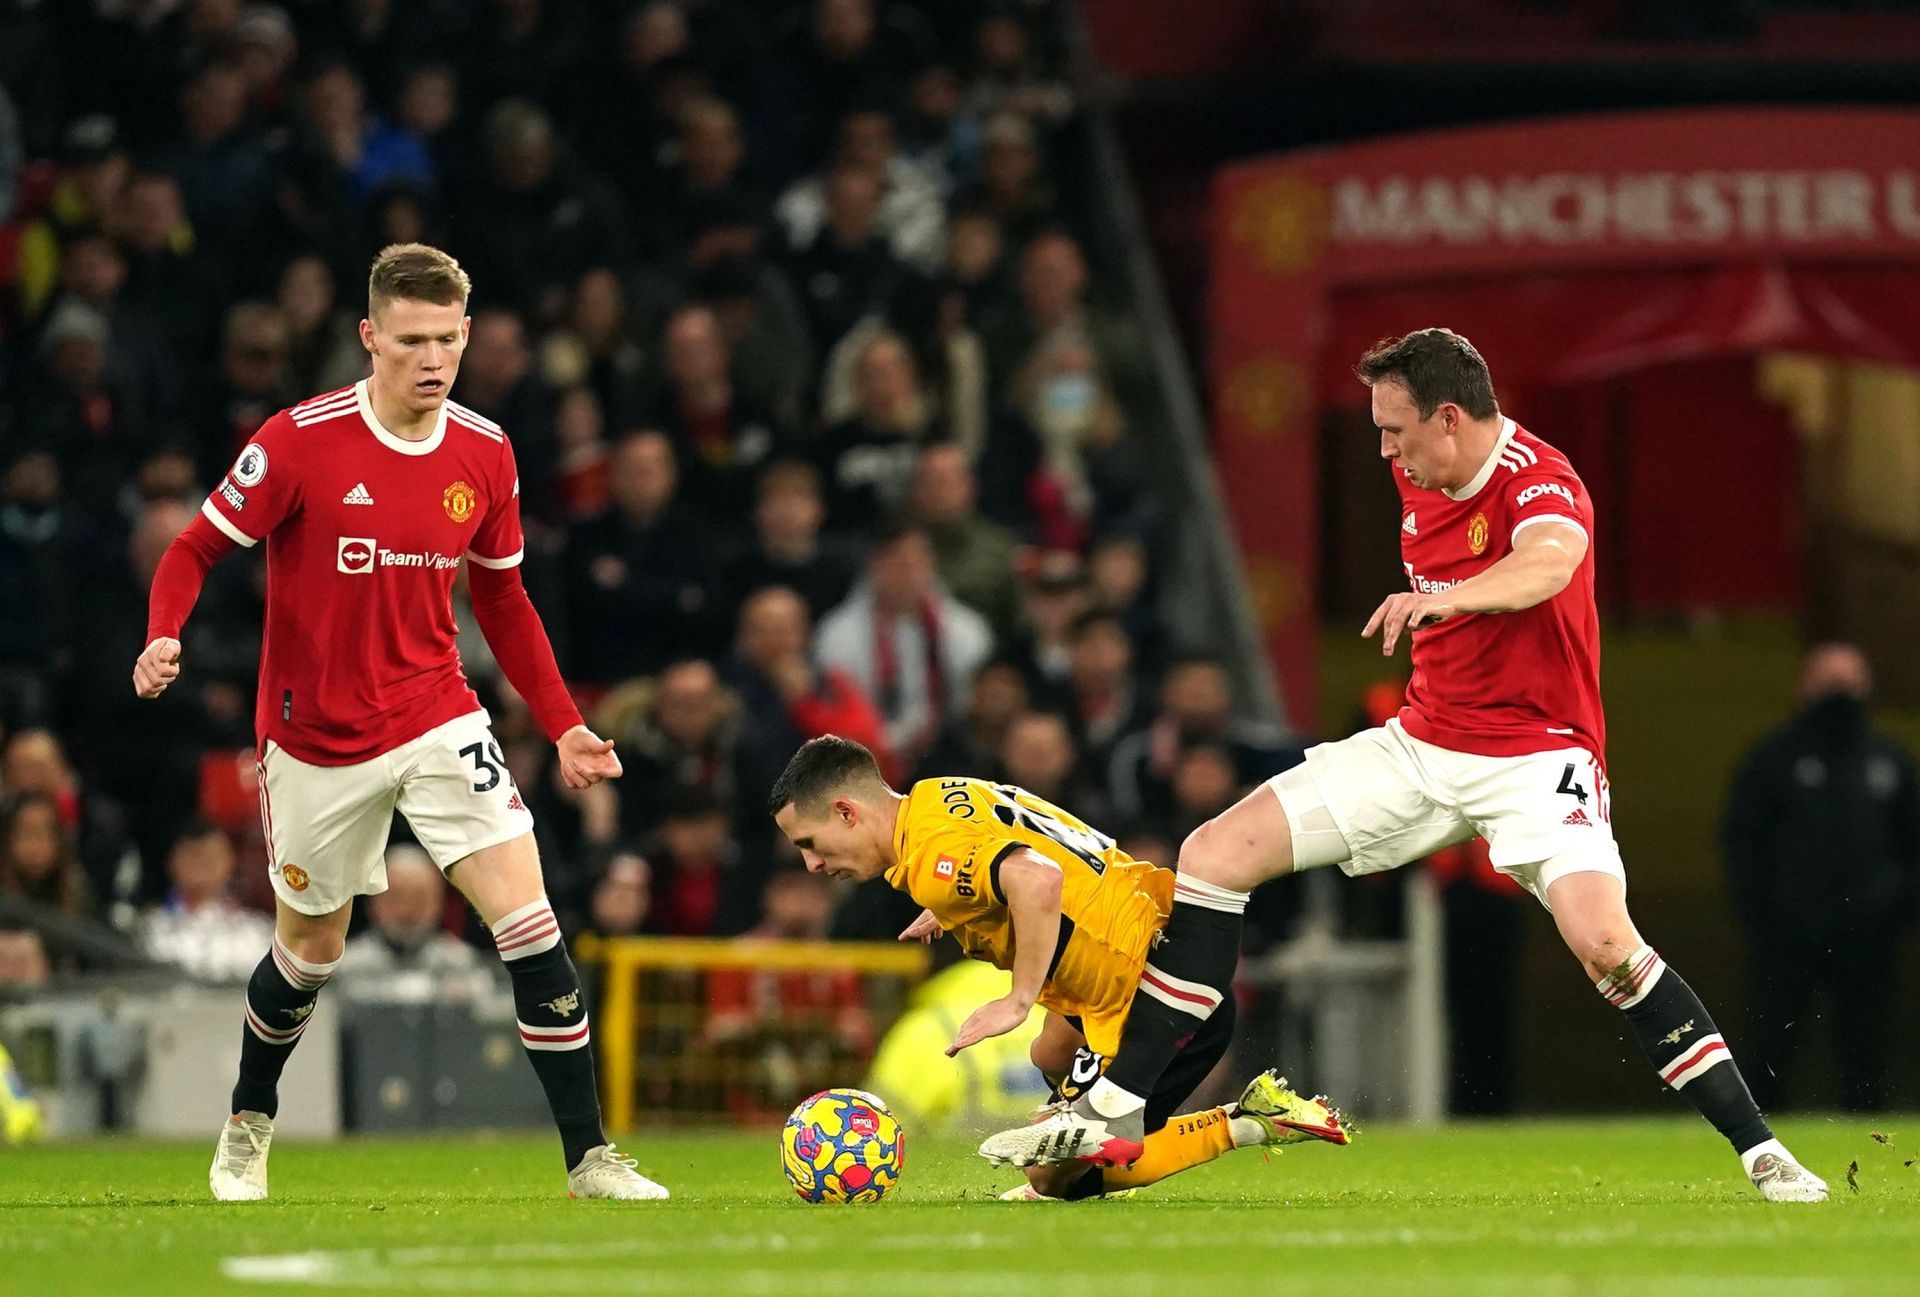 Manchester United fell to Wolves at Old Trafford